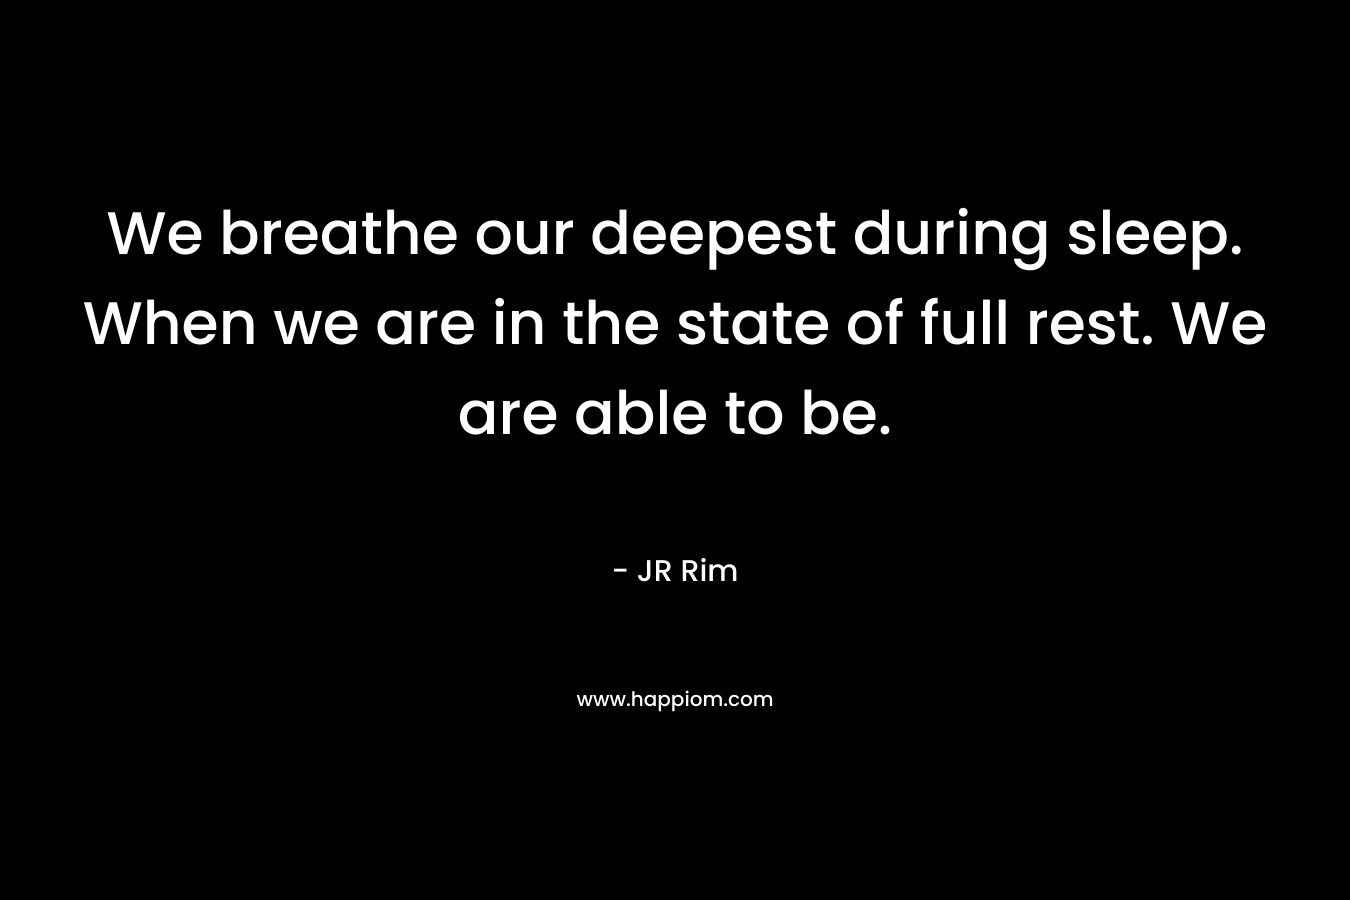 We breathe our deepest during sleep. When we are in the state of full rest. We are able to be. – JR Rim